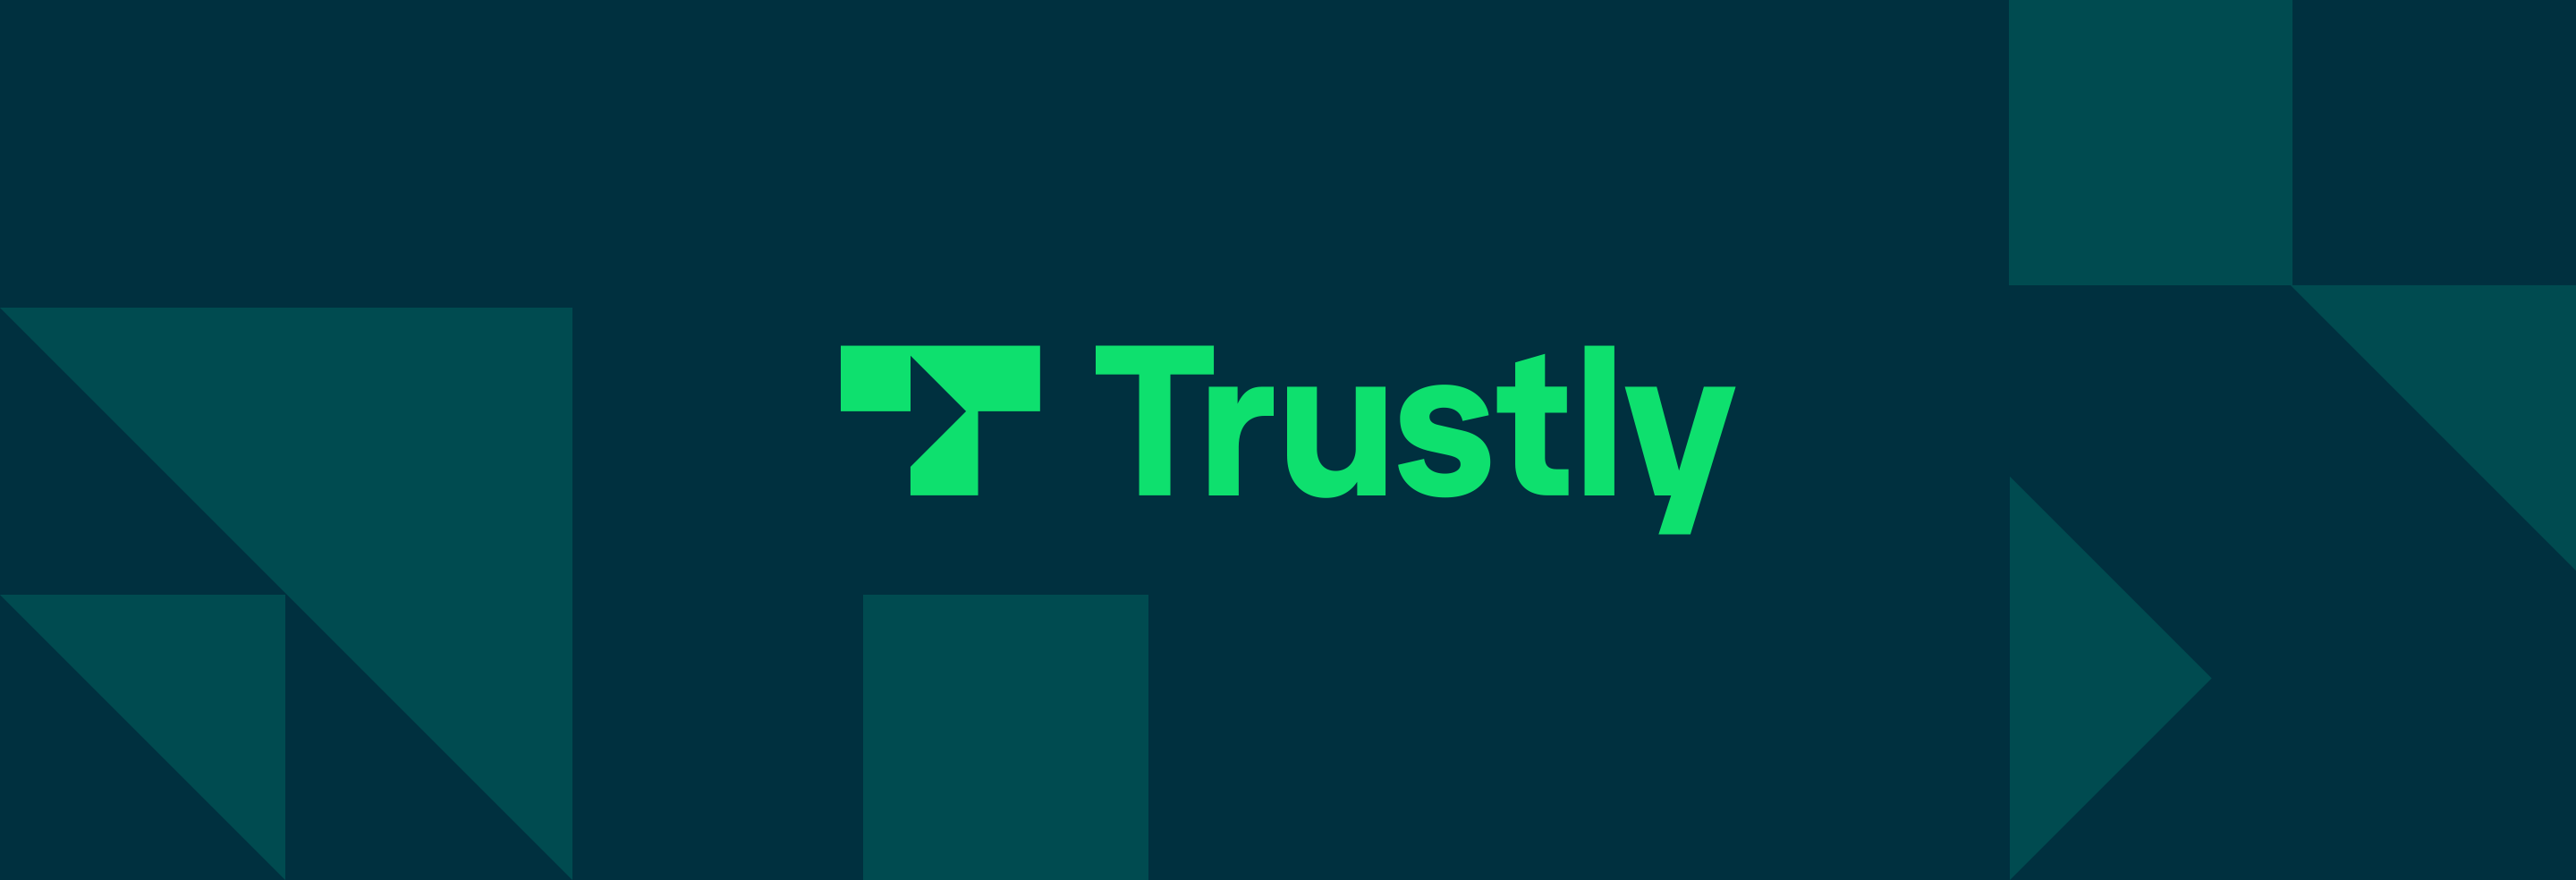 Casinos with Trustly